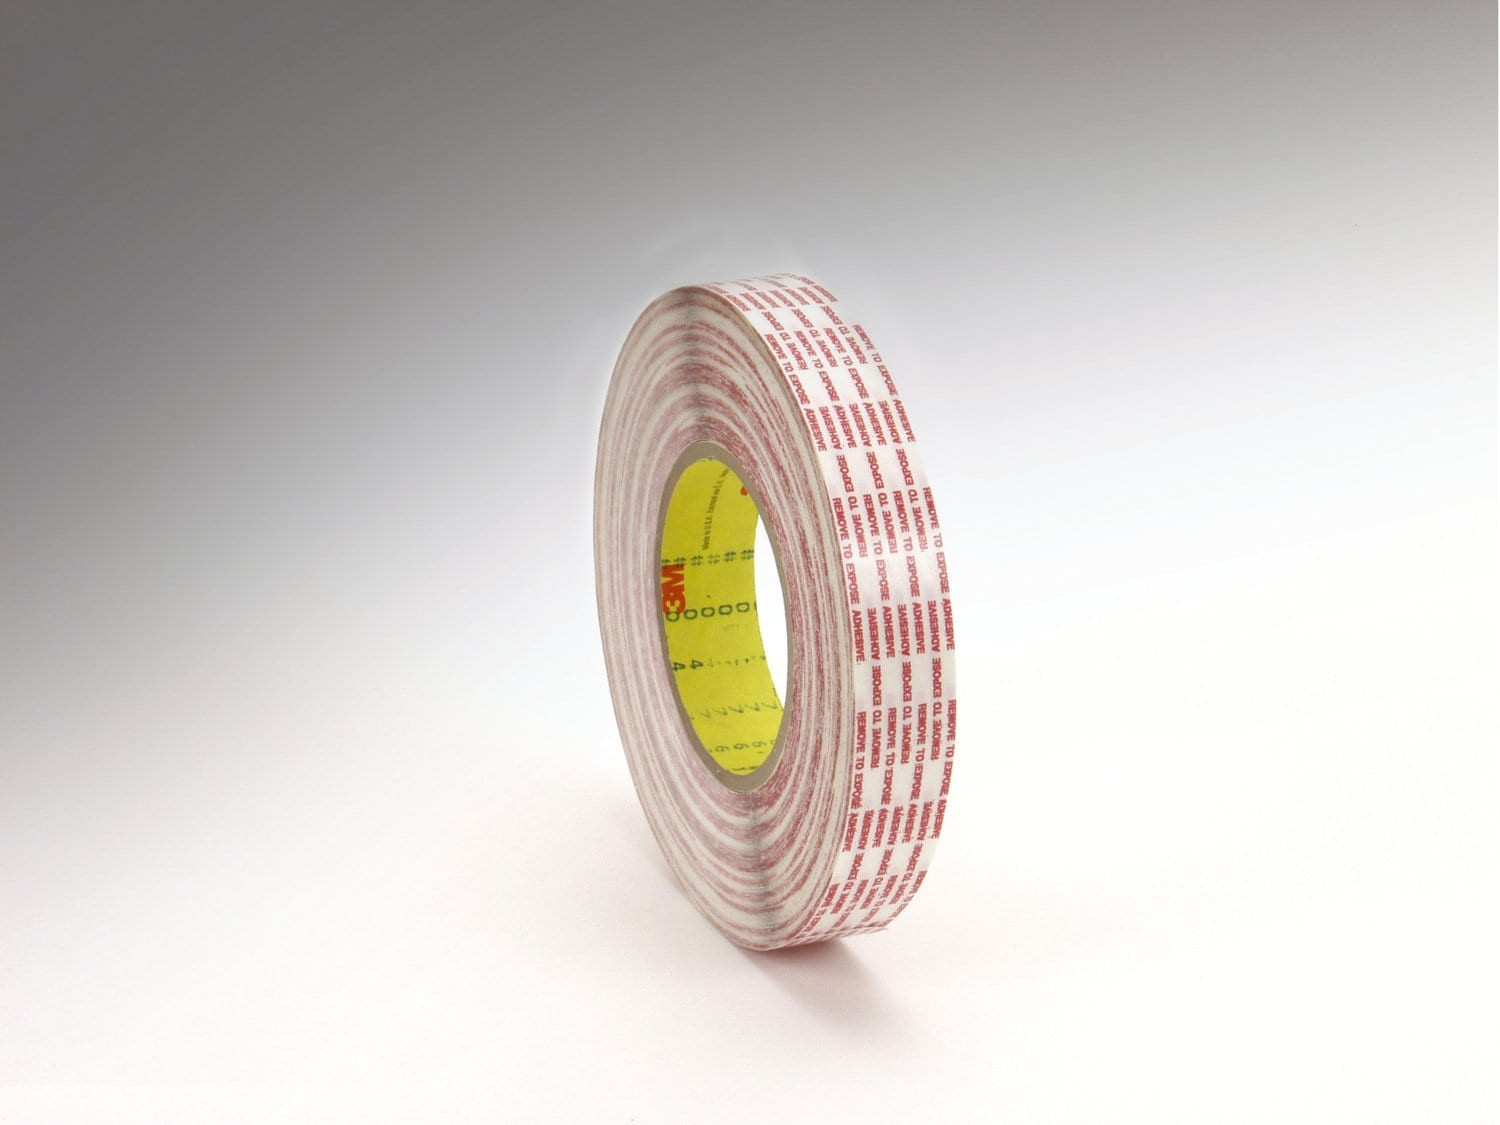 7010335908 - 3M Double Coated Tape Extended Liner 476XL, Translucent, 1/2 in x 540
yd, 6 mil, 12 rolls per case